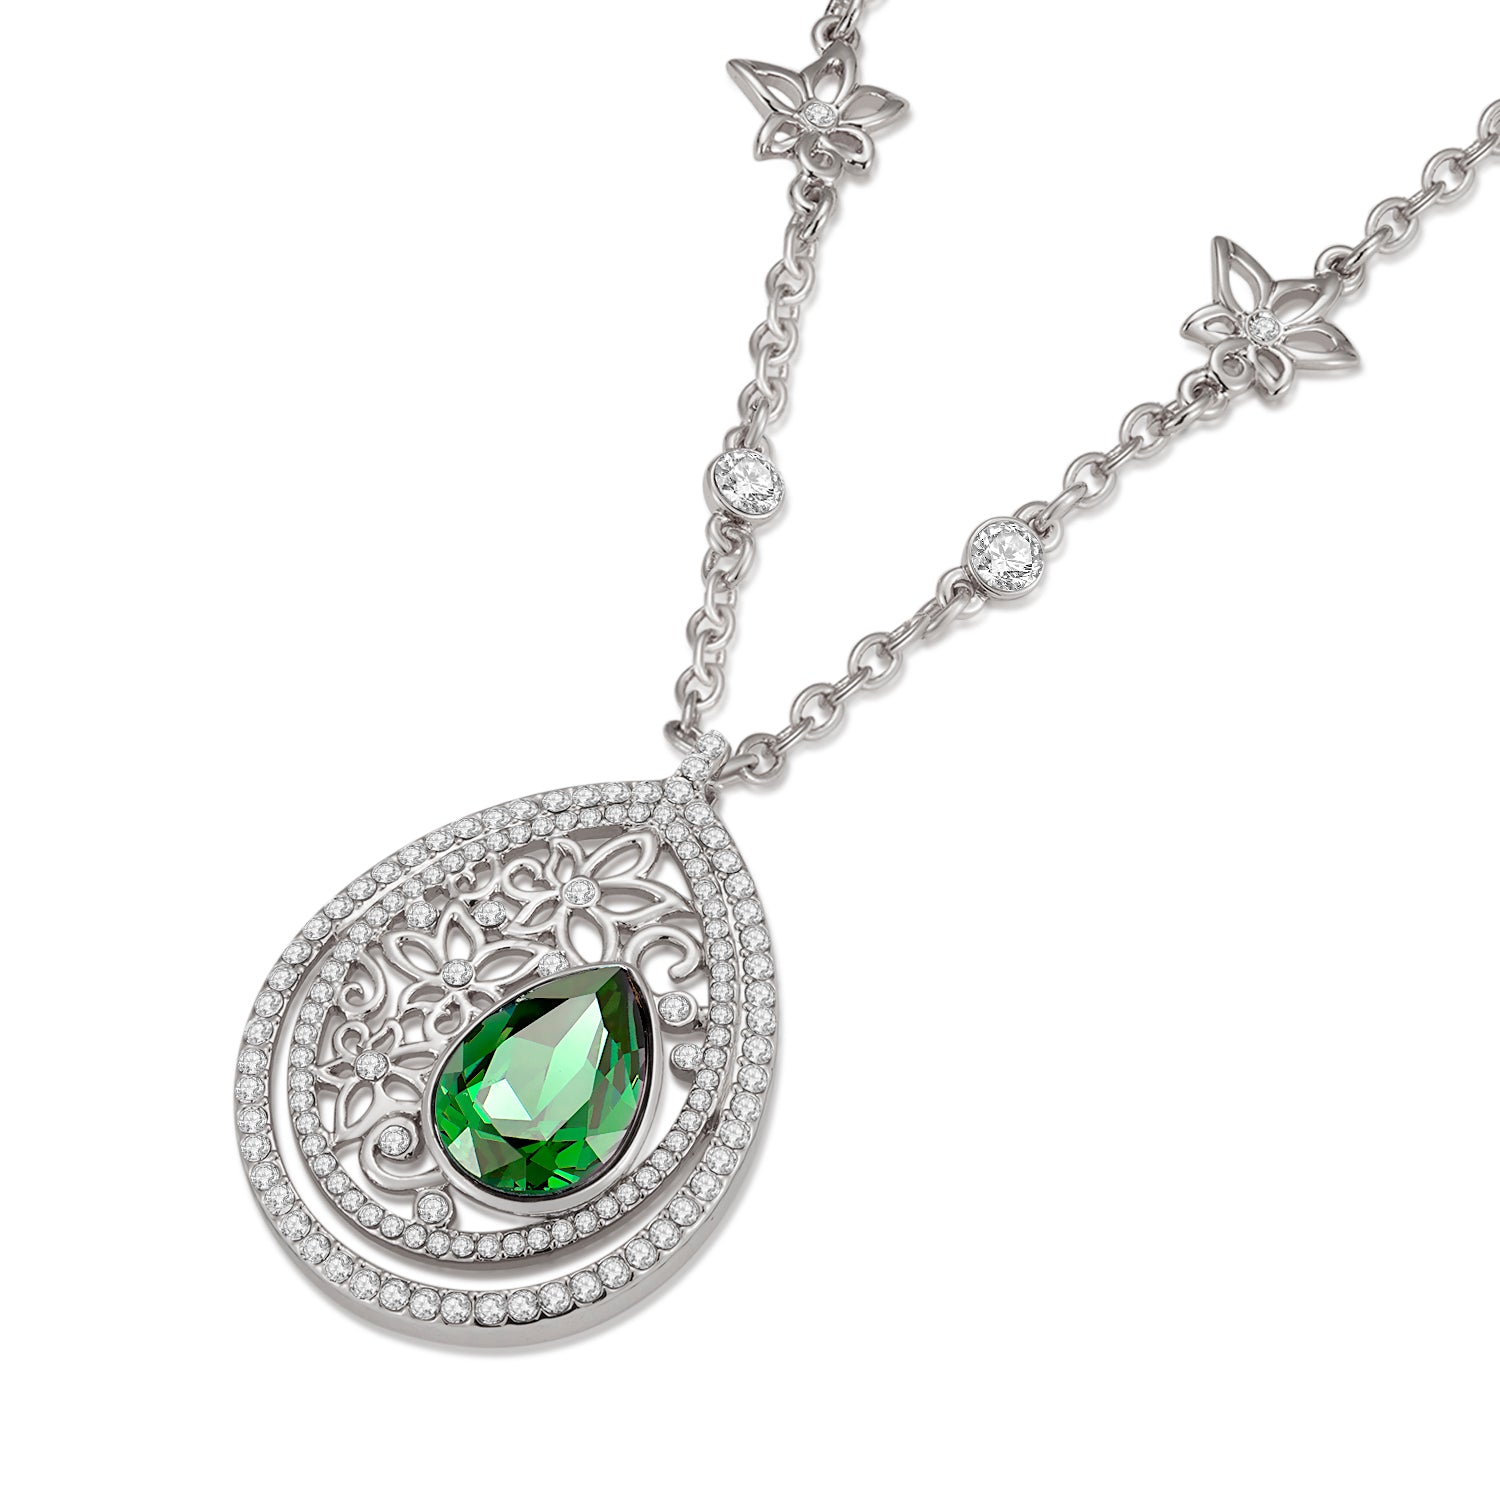 Simple Vicacci Teardrop necklace,Embellished with crystals from Swarovski